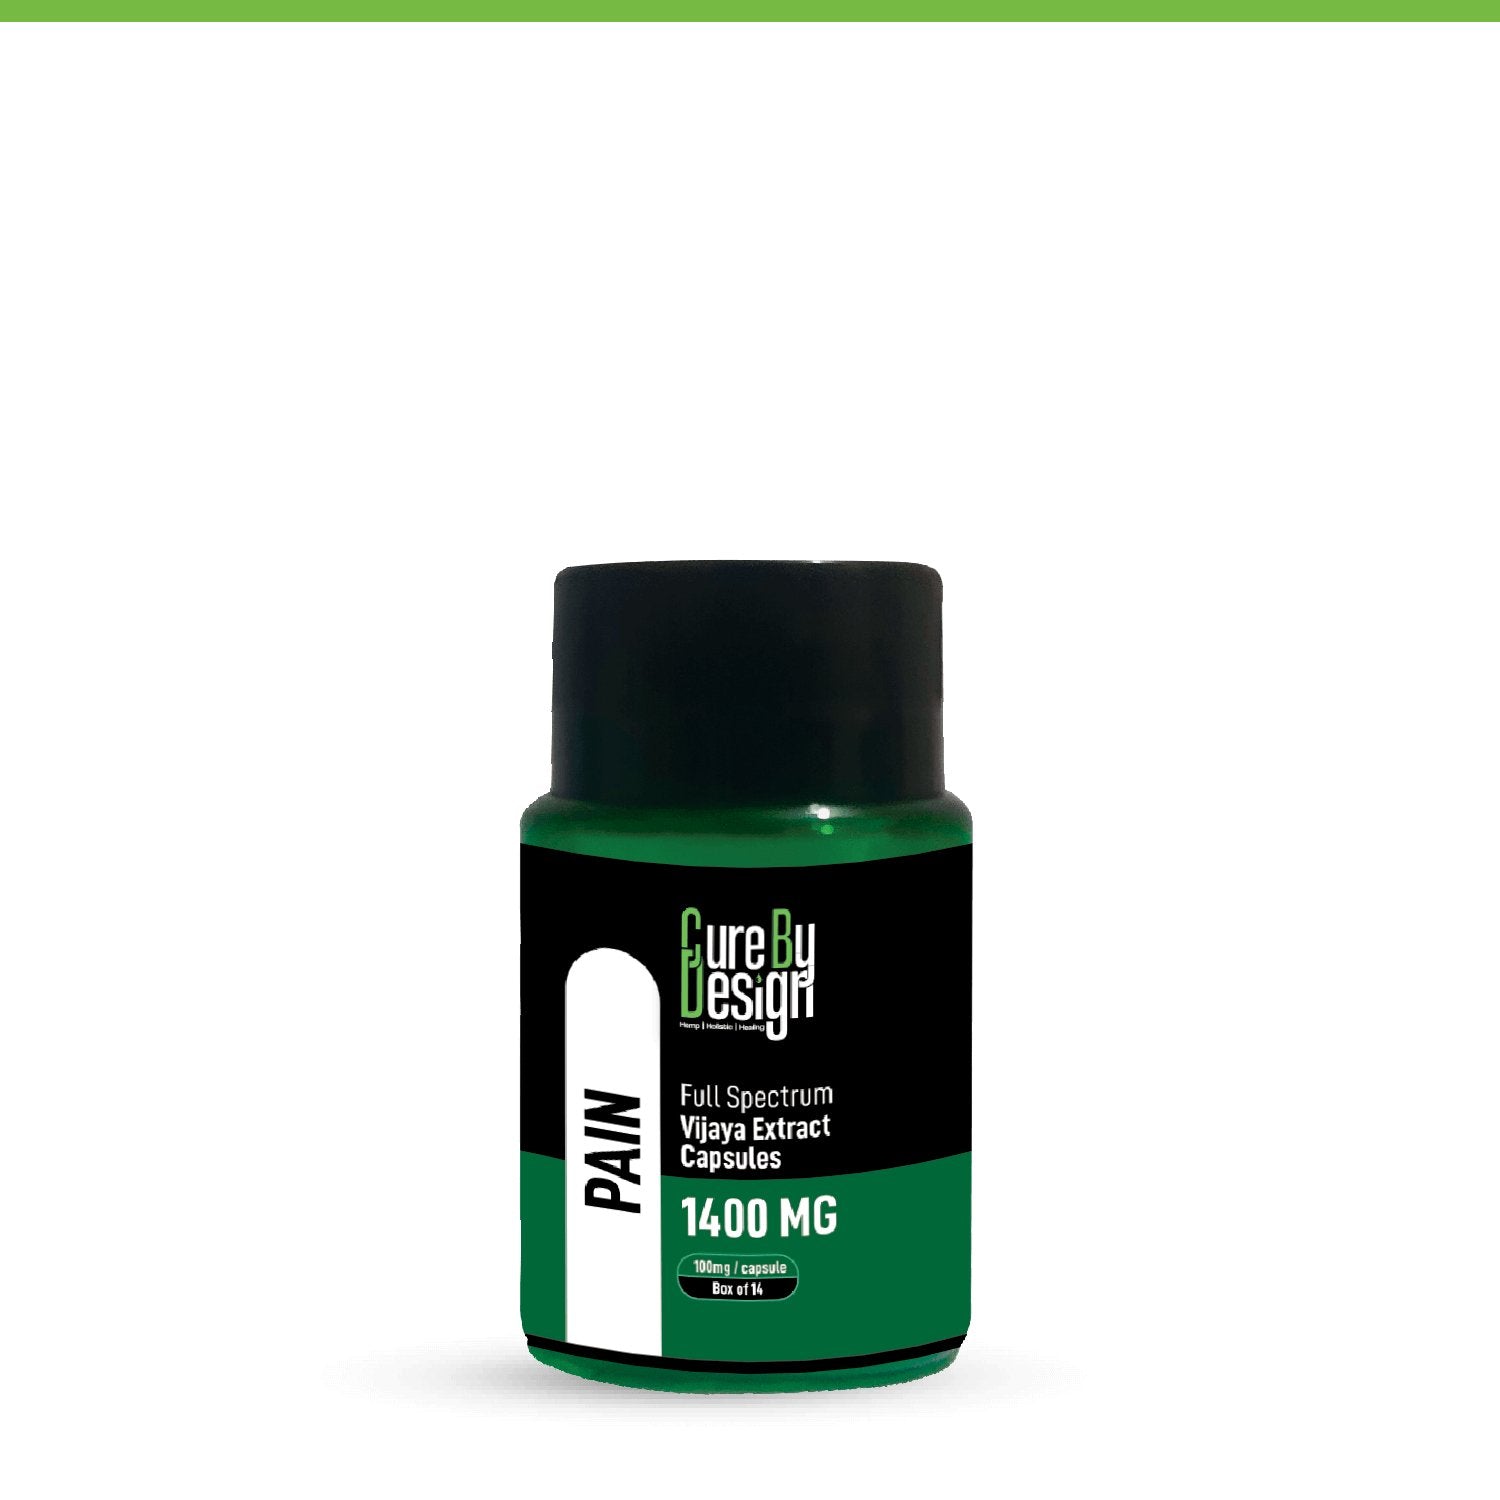 Cure By Design - Pain | 1400 MG-100mg/Capsule - THC Dominant (1:4 - CBD:THC) - CBD Store India